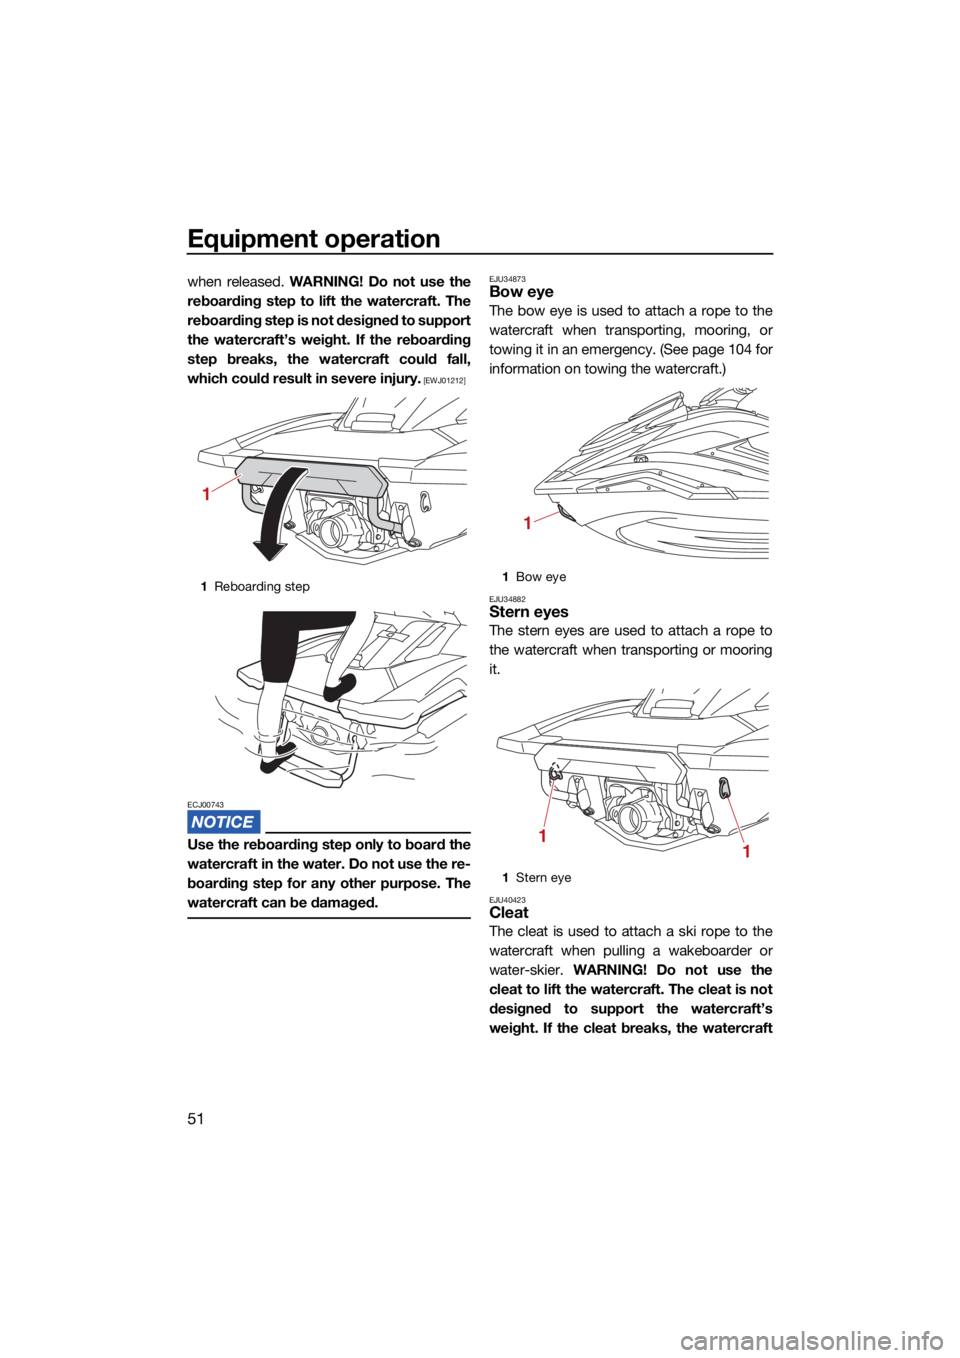 YAMAHA FX SVHO 2021  Owners Manual Equipment operation
51
when released. WARNING! Do not use the
reboarding step to lift the watercraft. The
reboarding step is not designed to support
the watercraft’s weight. If the reboarding
step b